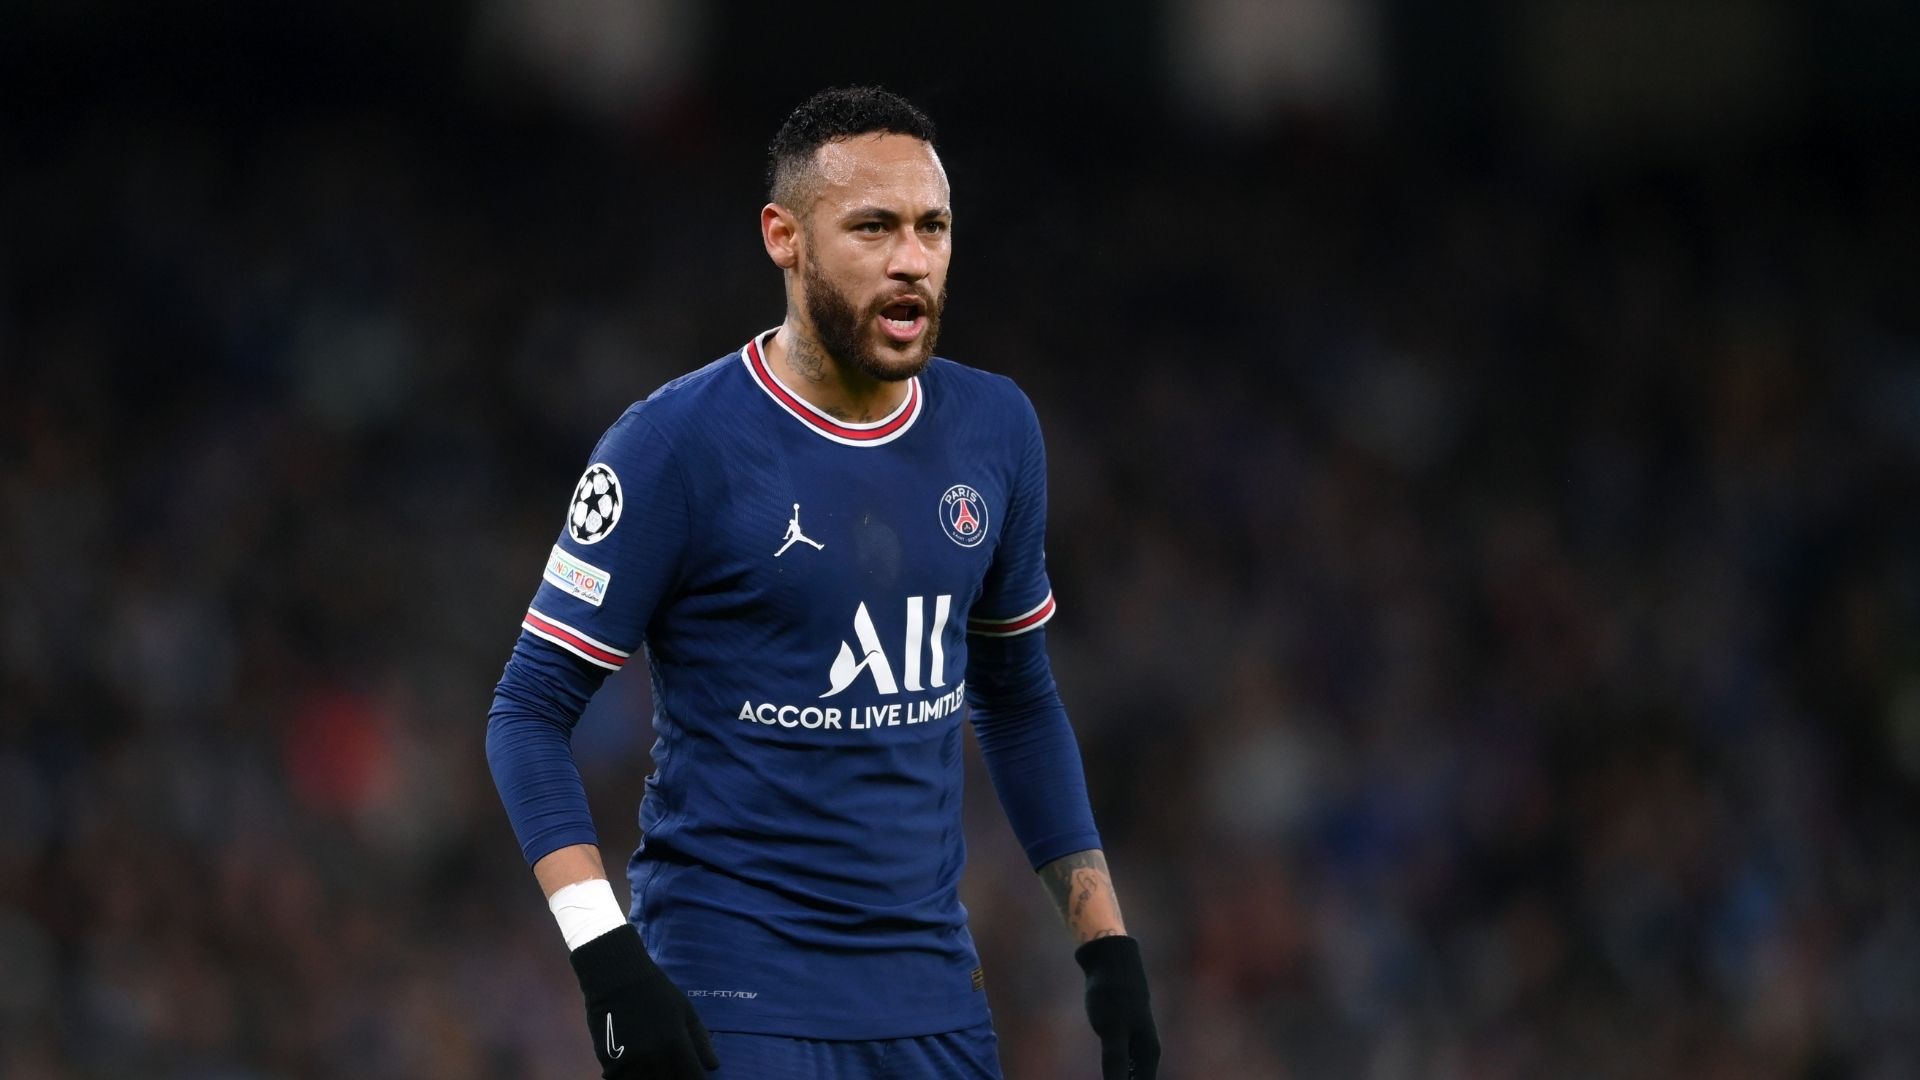 PSG intend to sell Neymar in the next window